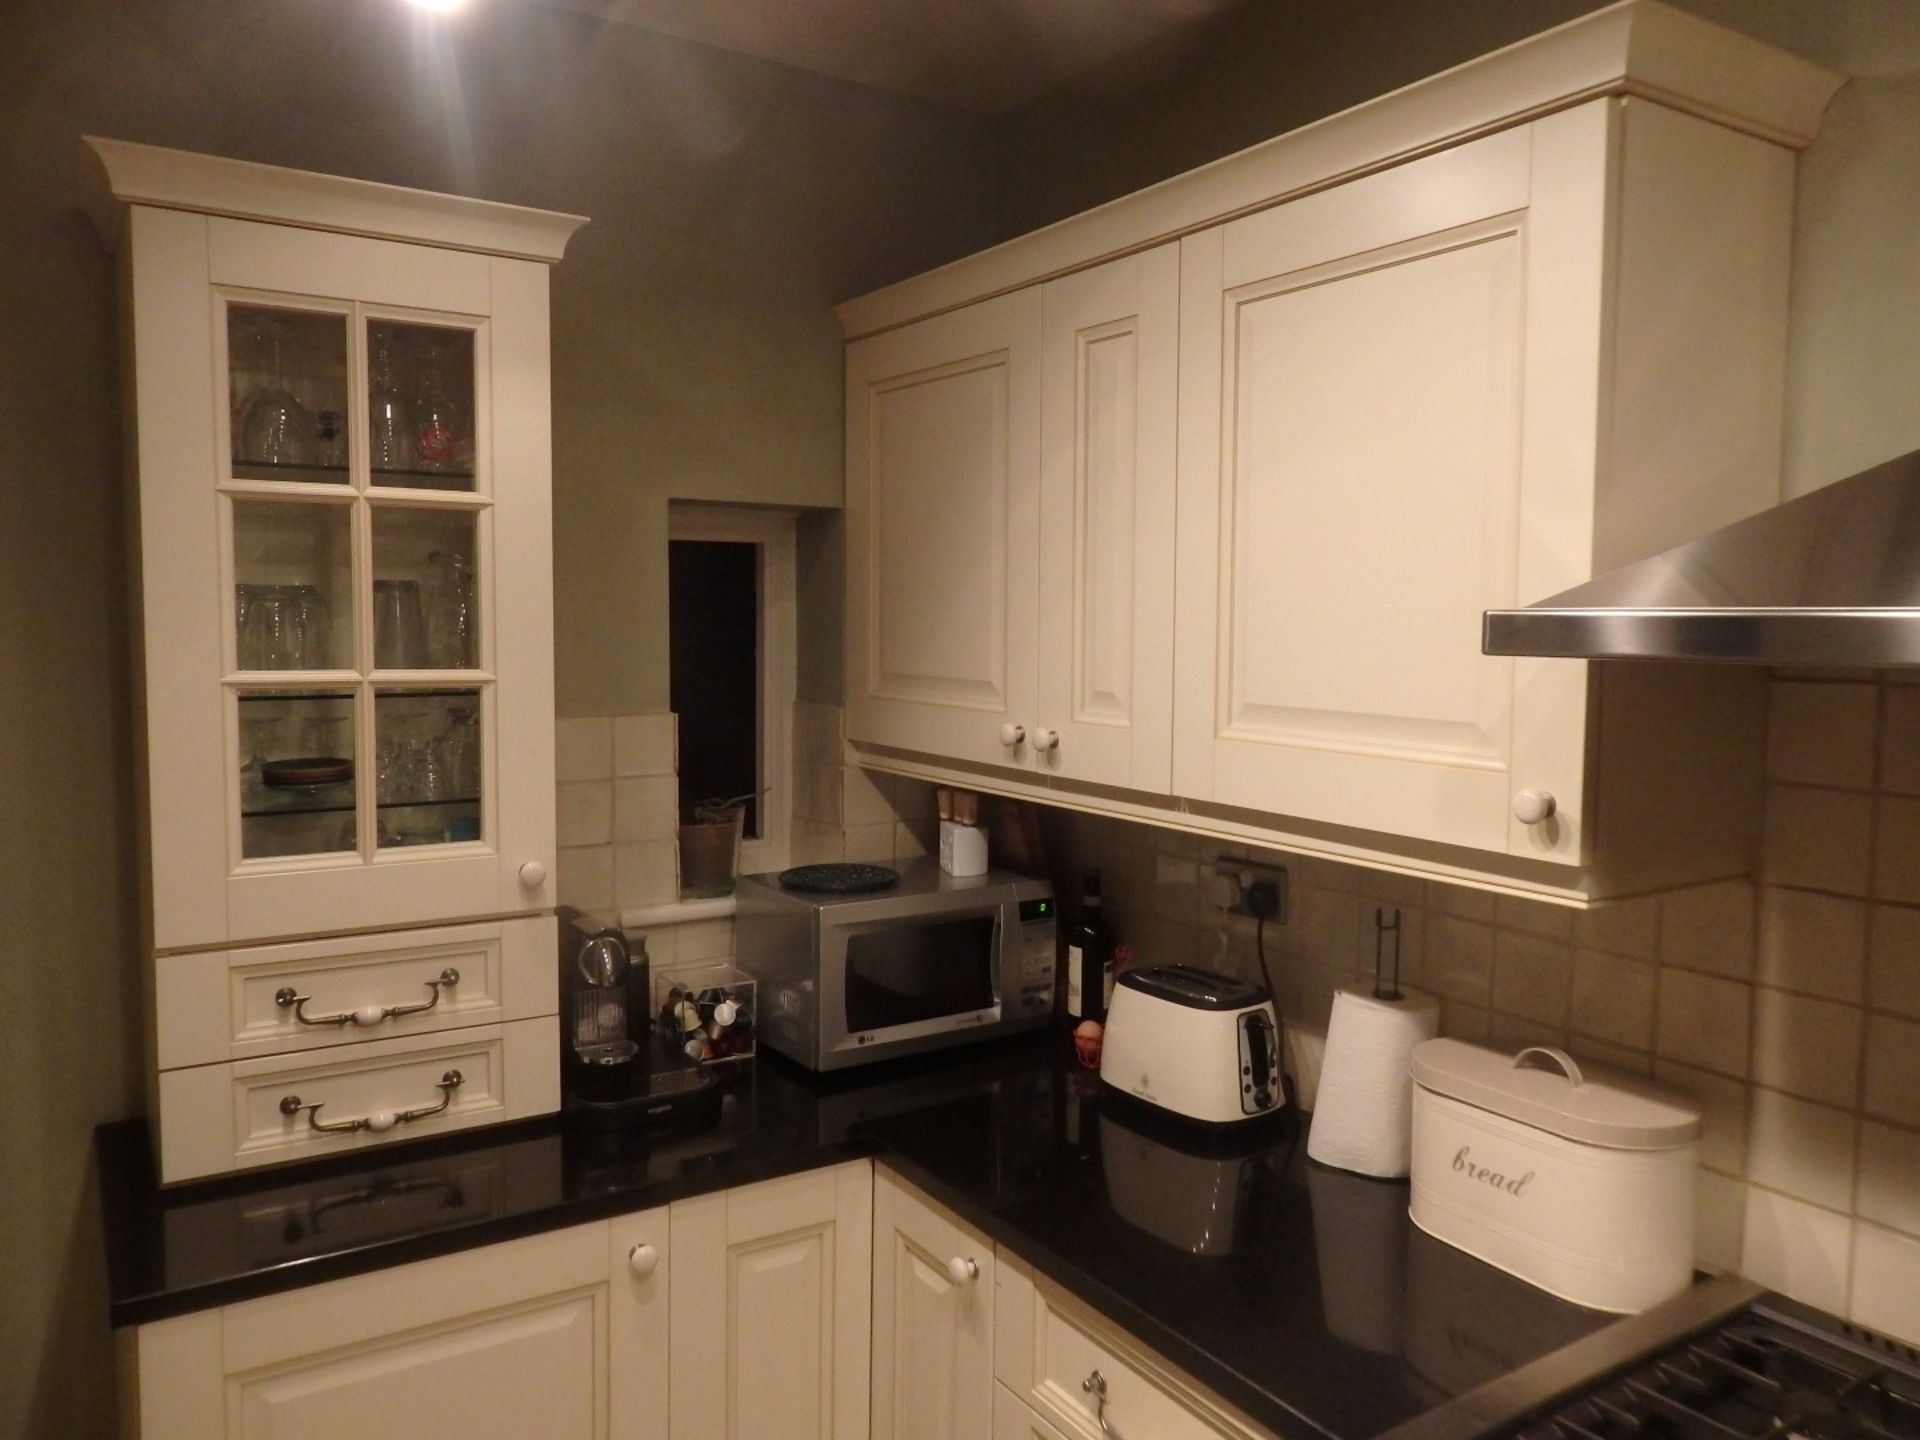 1 x Antique Cream Shaker Style Kitchen With Black Granite Worktops - Pewter and Glazed Porcelian - Image 14 of 24